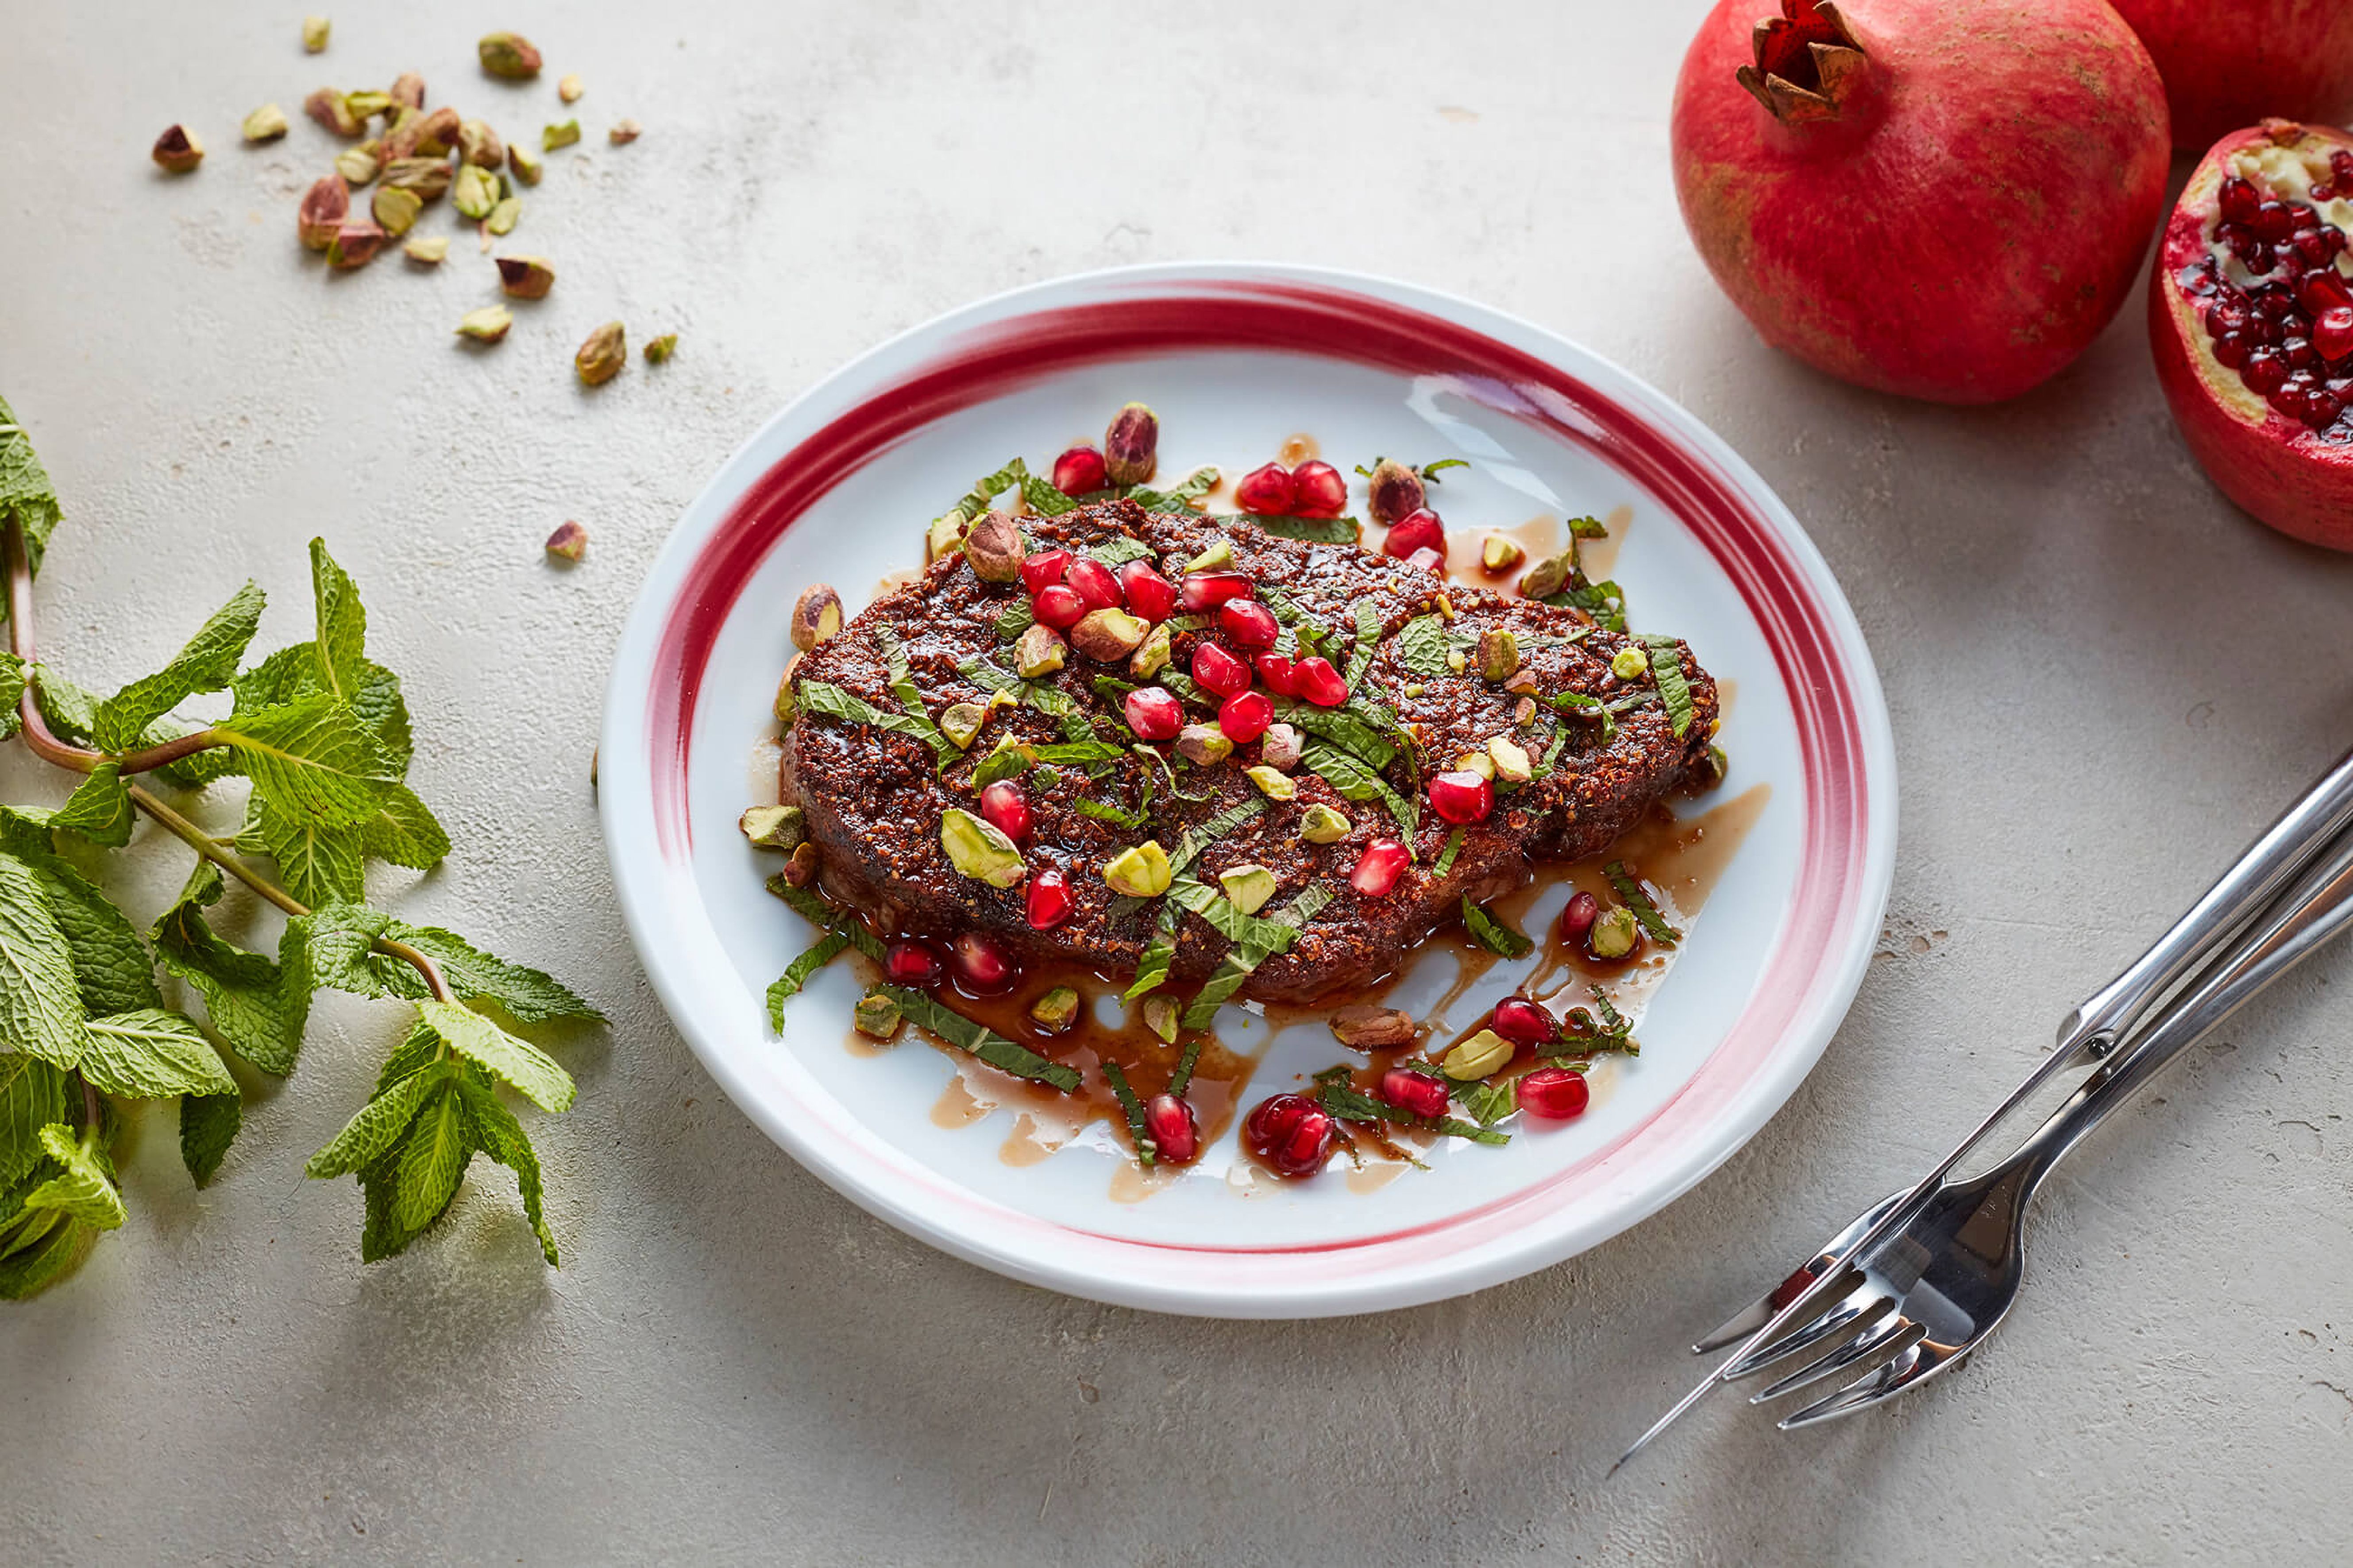 Beef Fillet: Cook at home with CERU this NYE